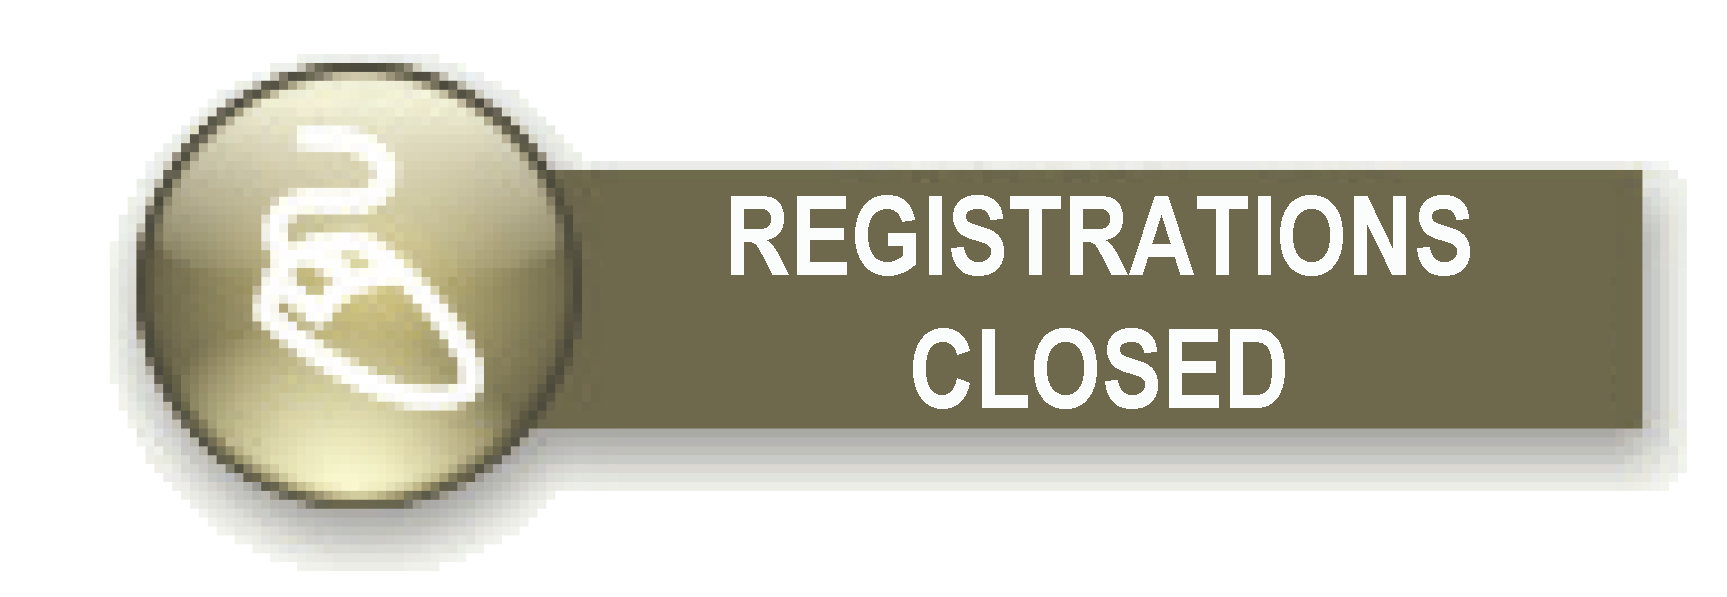 Registration is closed.